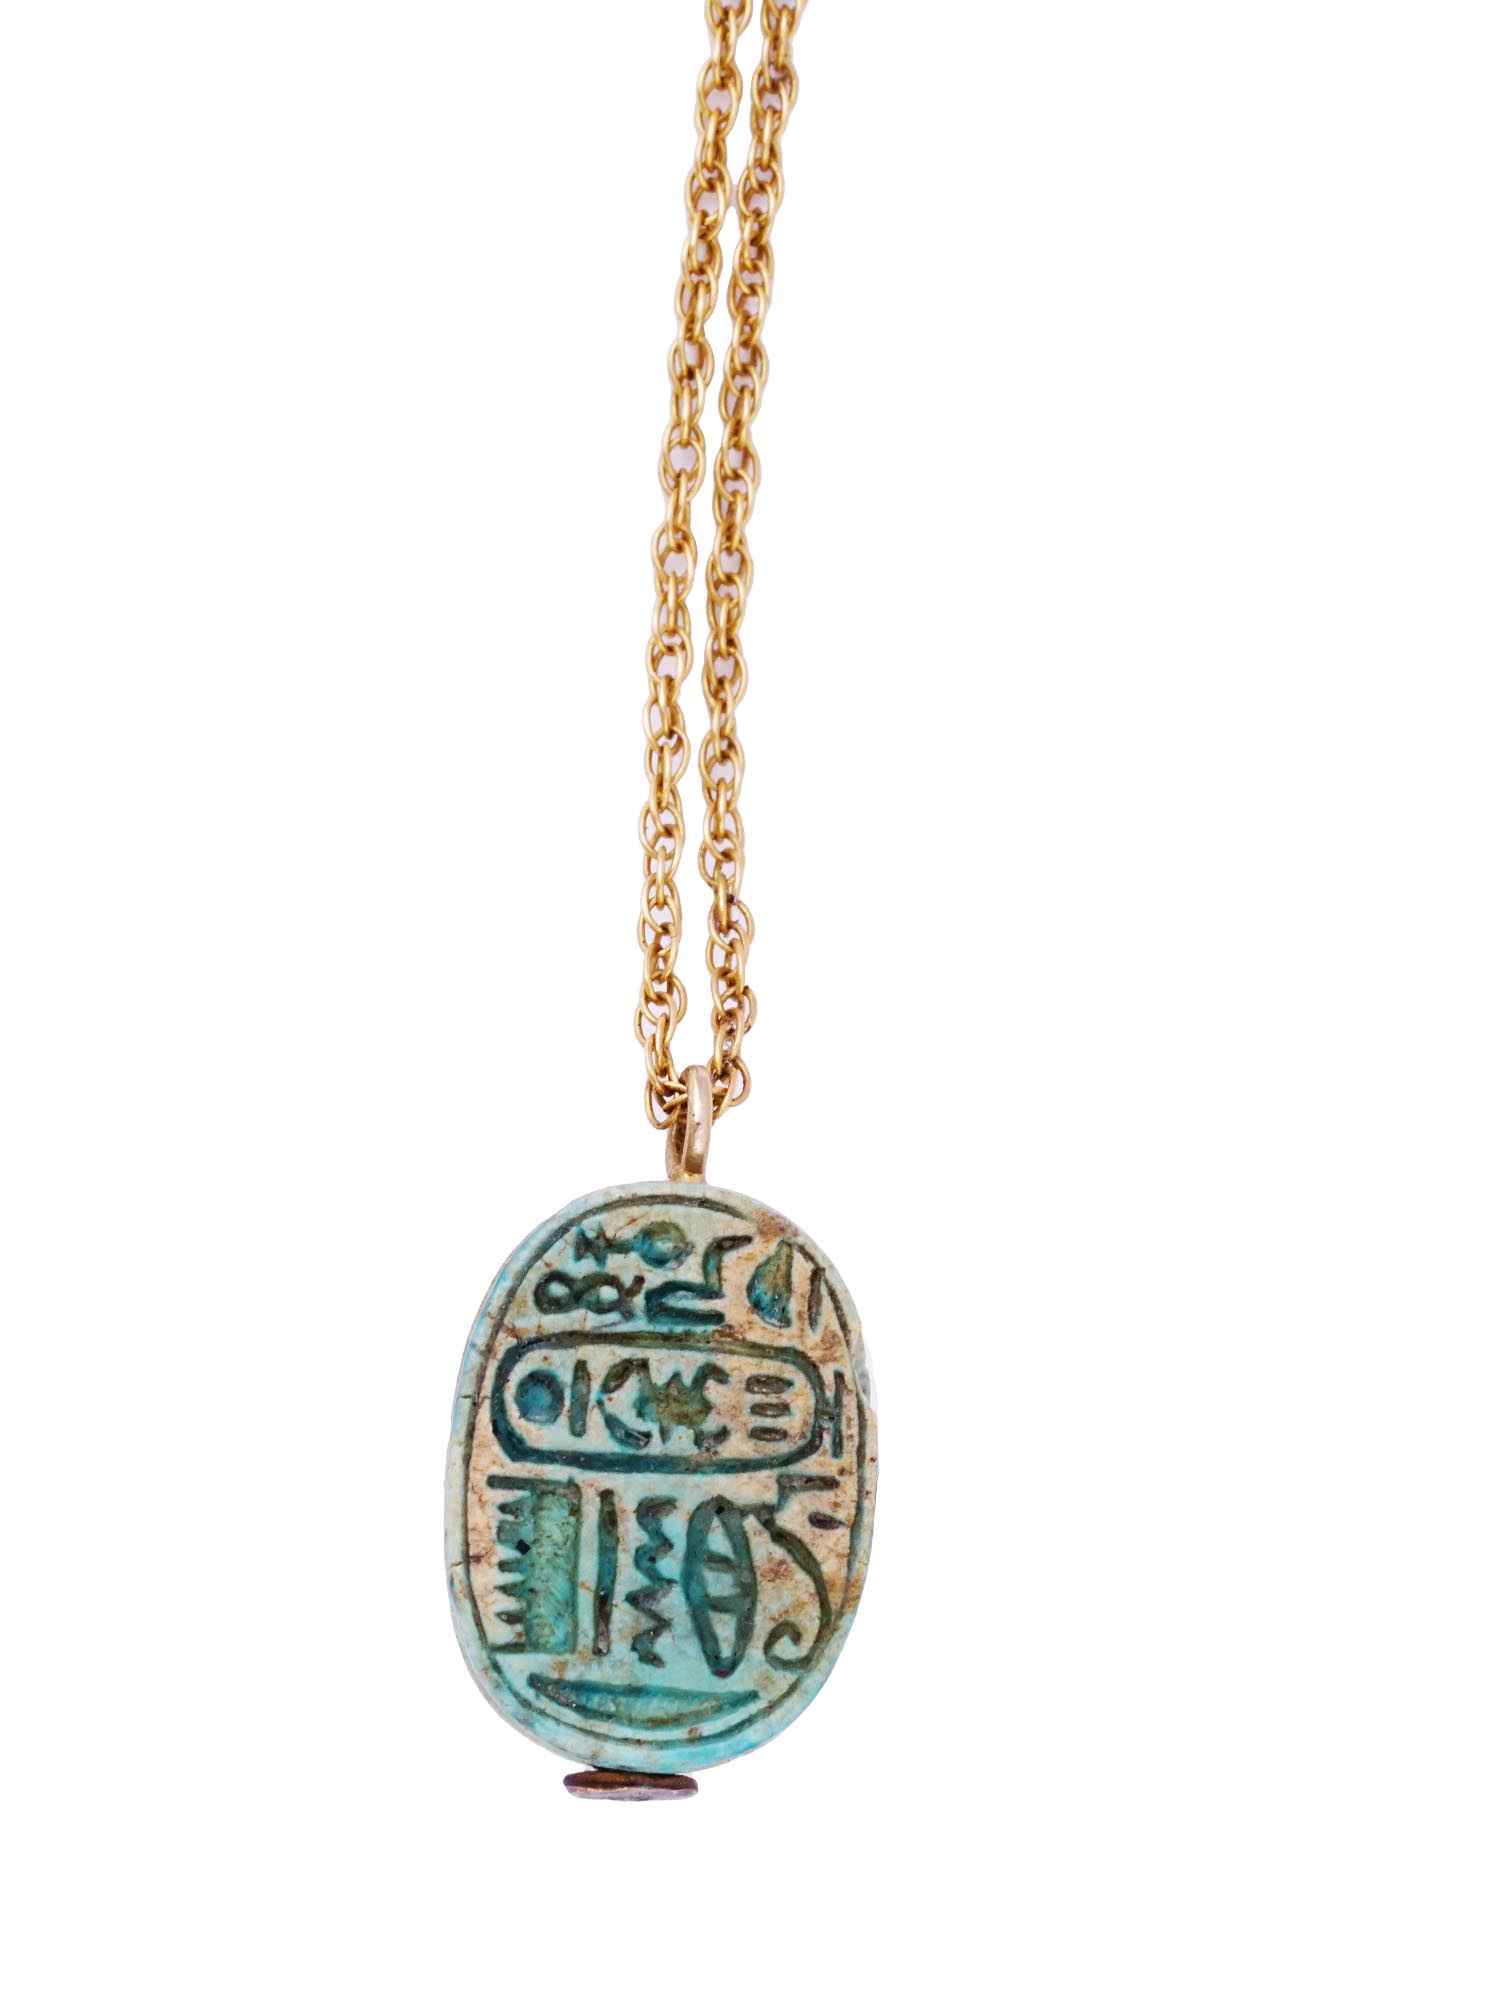 EGYPTIAN FAIENCE SCARAB NECKLACE WITH 14K GOLD CHAIN PIC-4